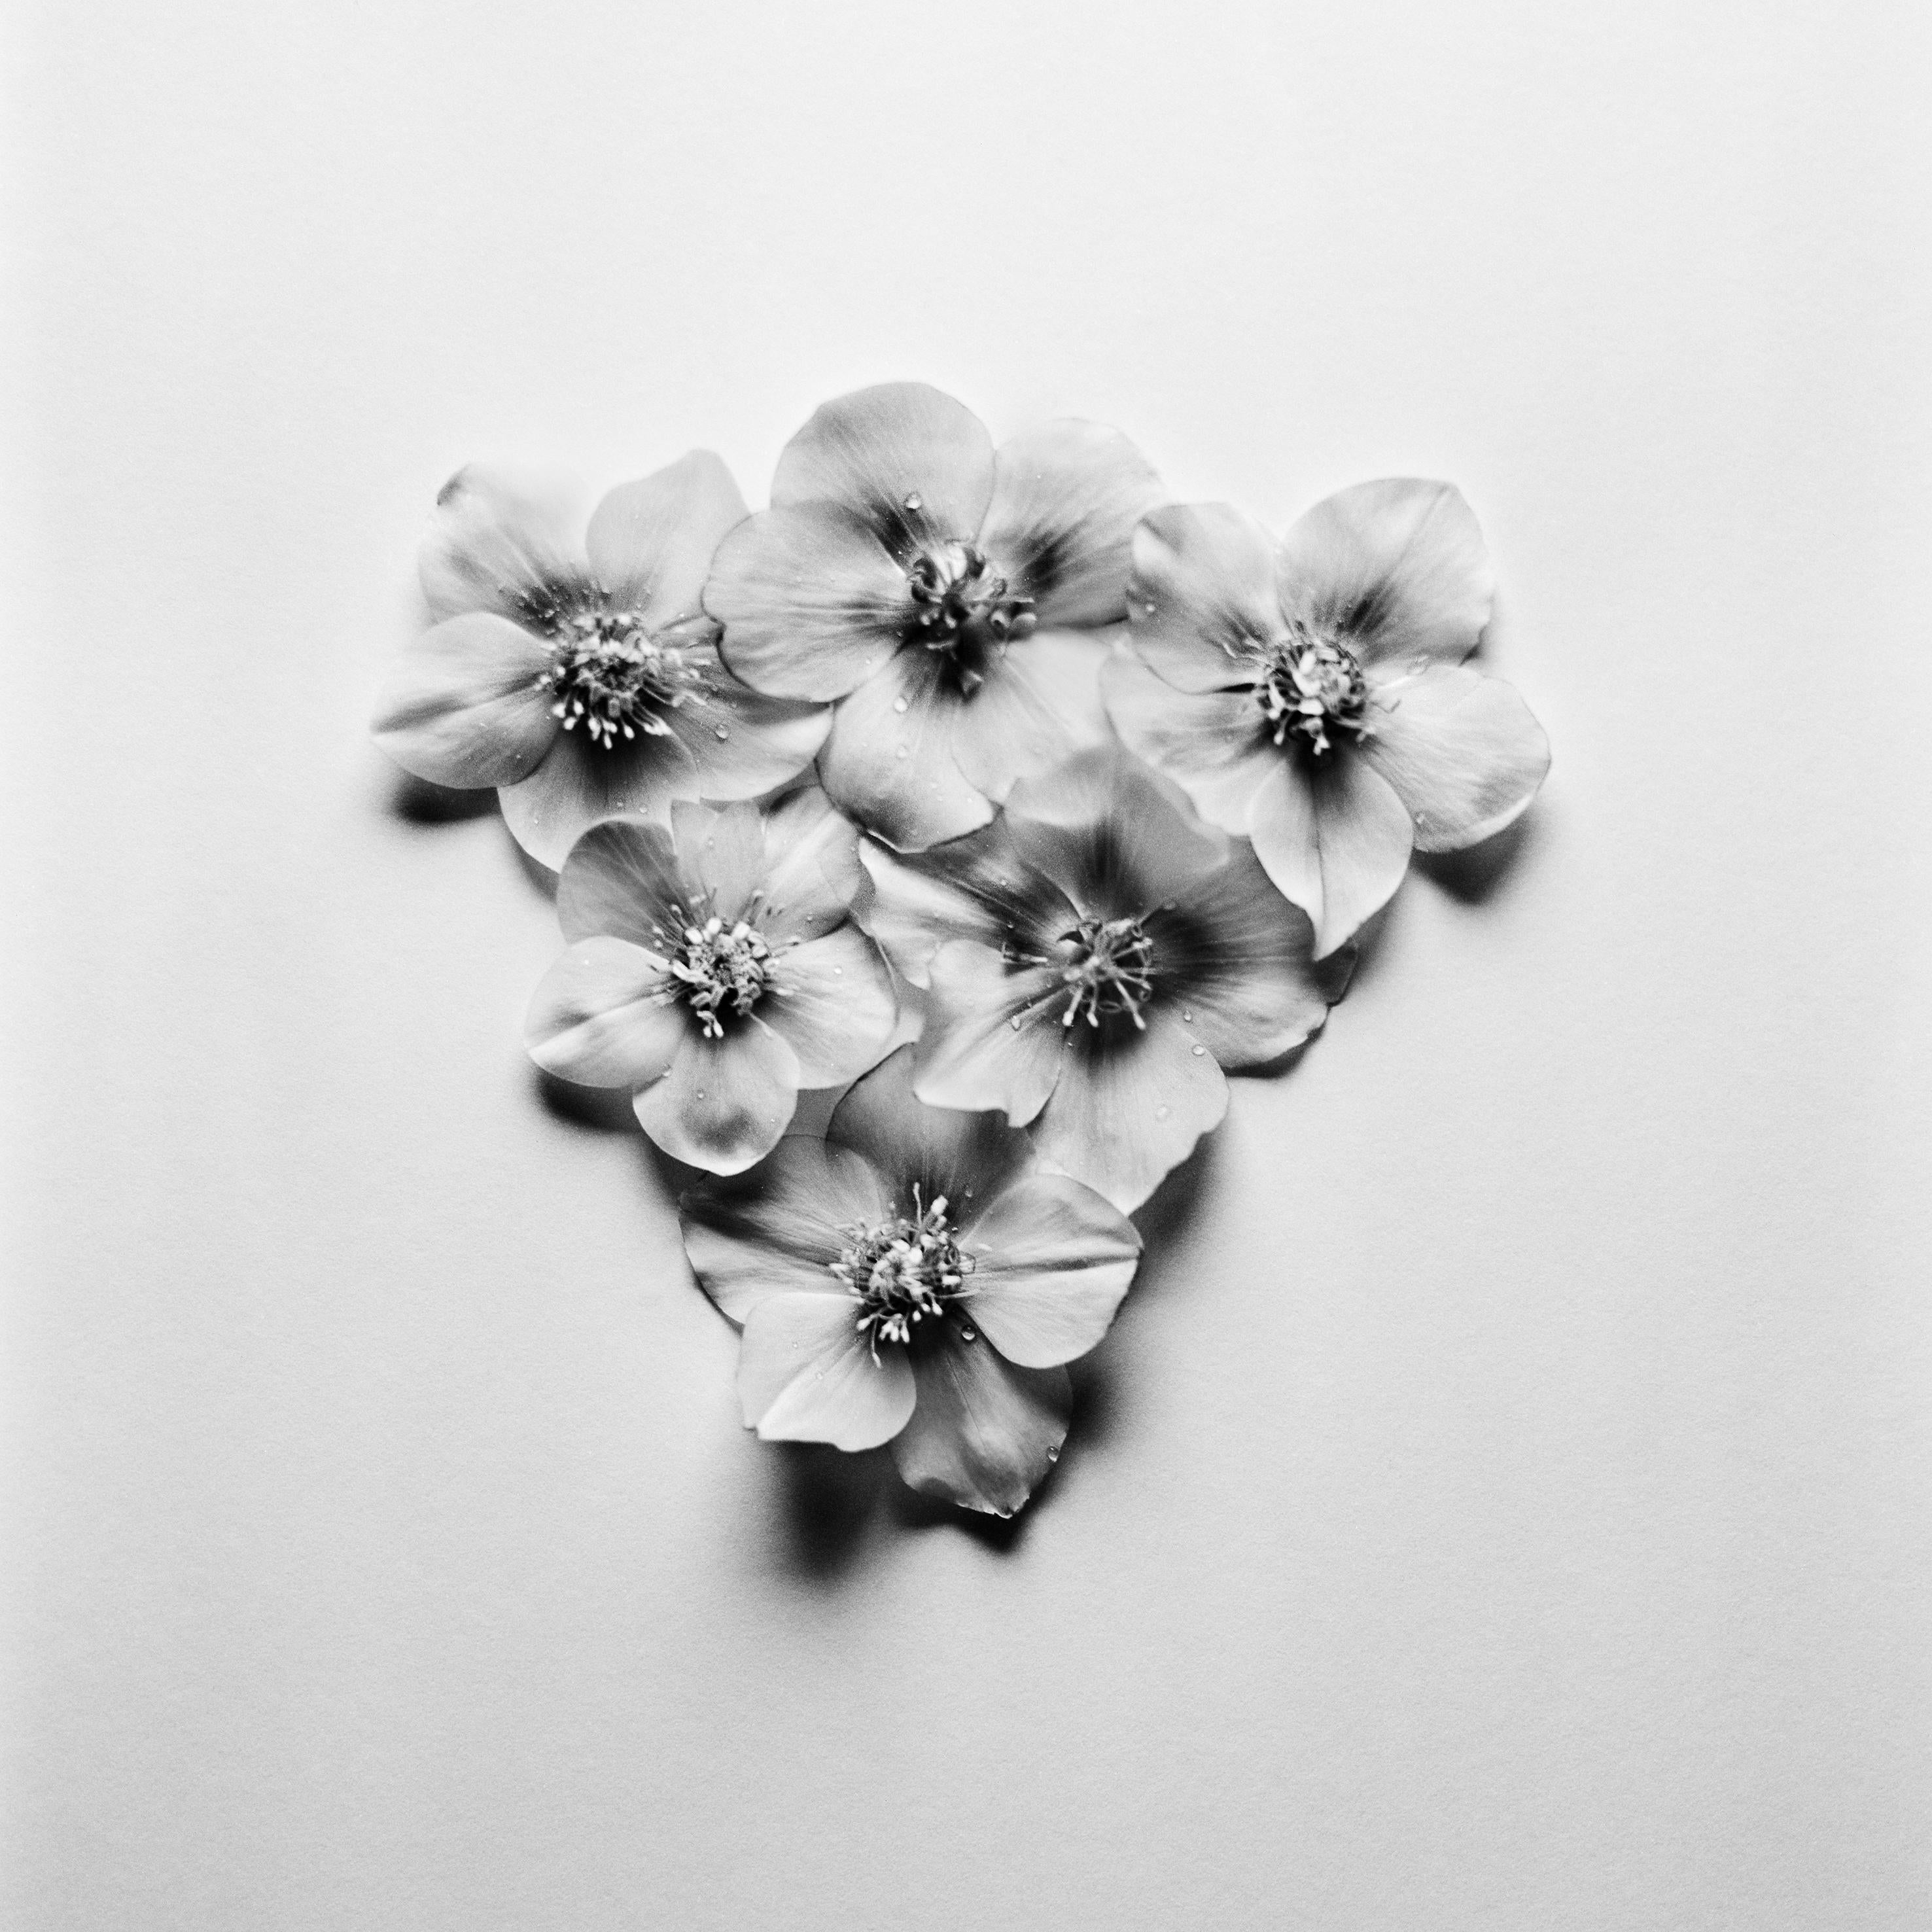 Ugne Pouwell Still-Life Photograph - Black Hellebore No.3 - analogue black and white floral photography